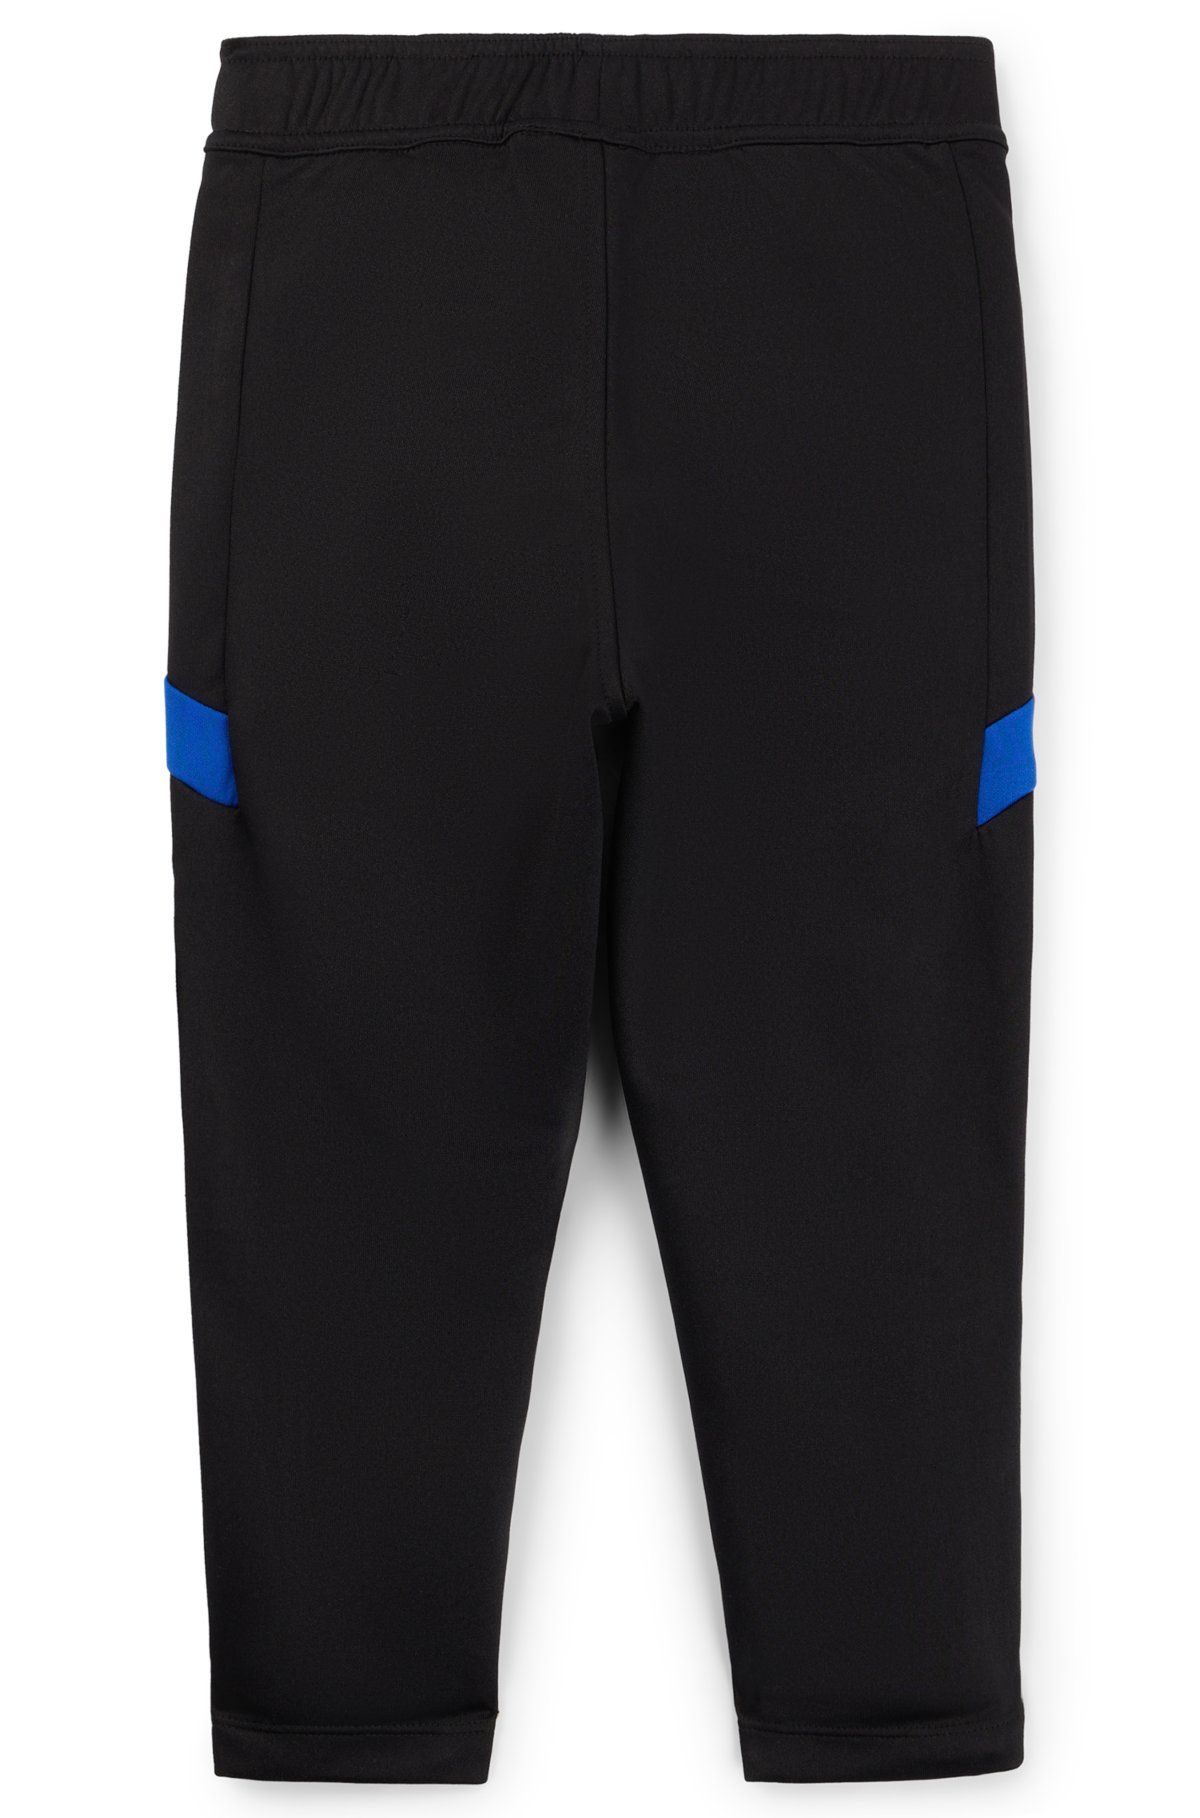 Kids' tracksuit bottoms with stripes and logo details, Black